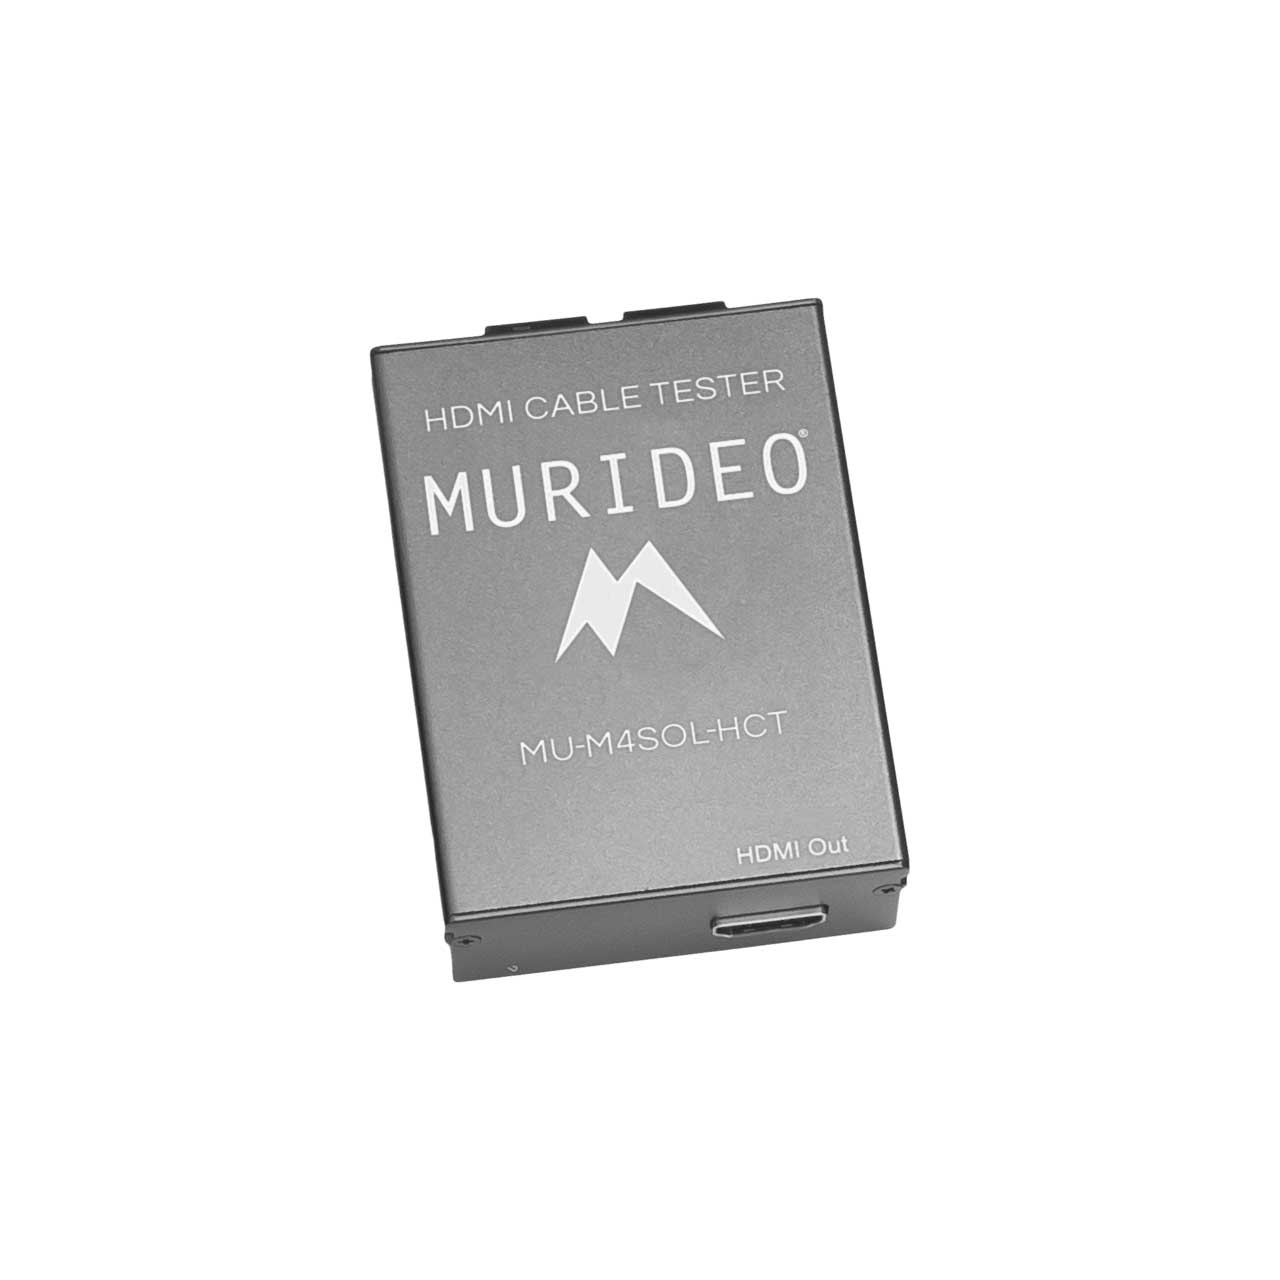 Murideo MU-M4SOL-HCT HDMI Cable Test Module